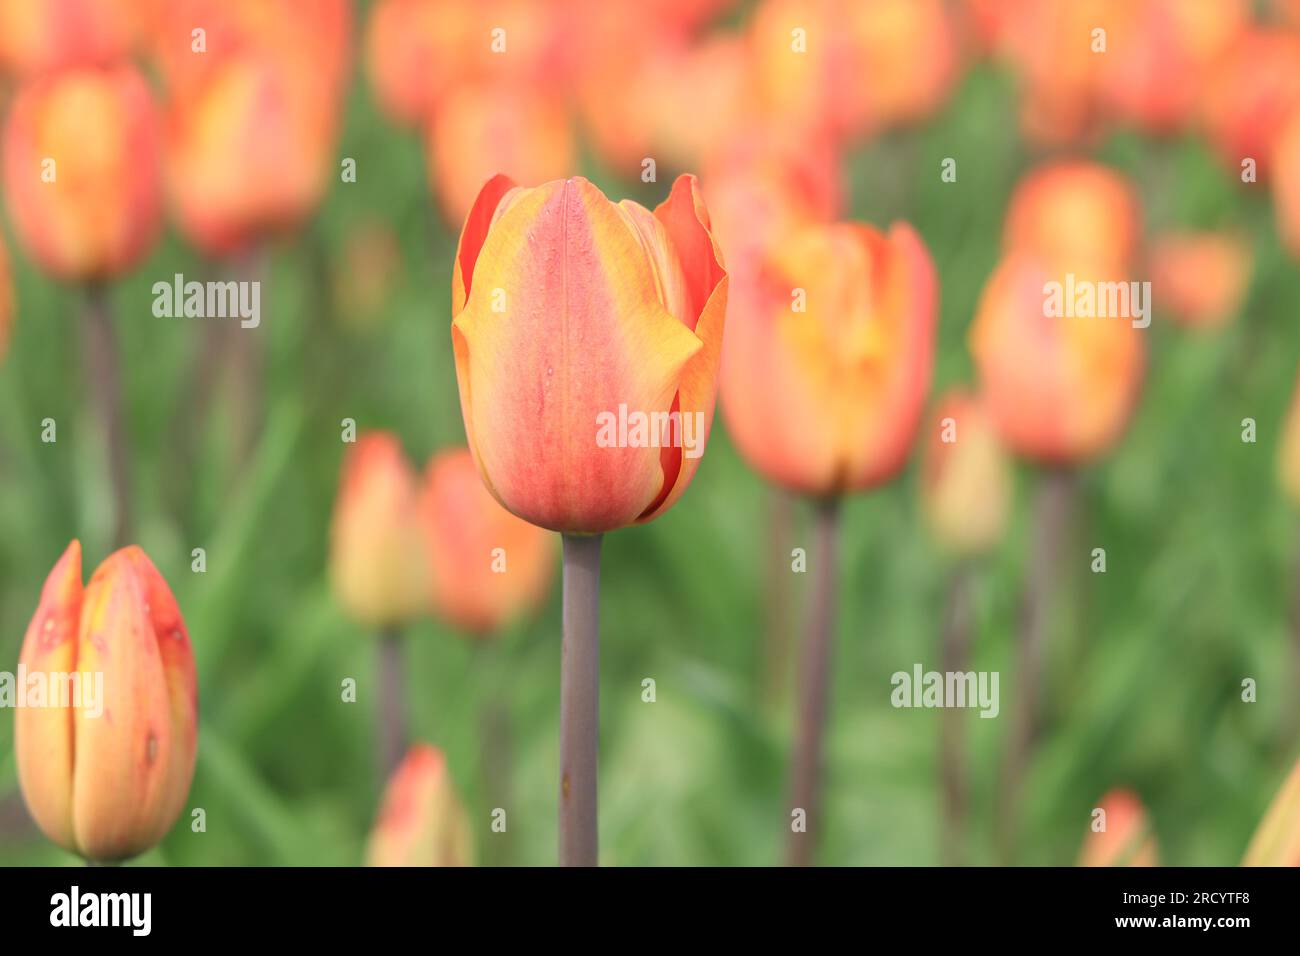 Bright tulip close-up on a blurred background. Field of spring flowers, flowerbed. Park with colorful tulips Stock Photo